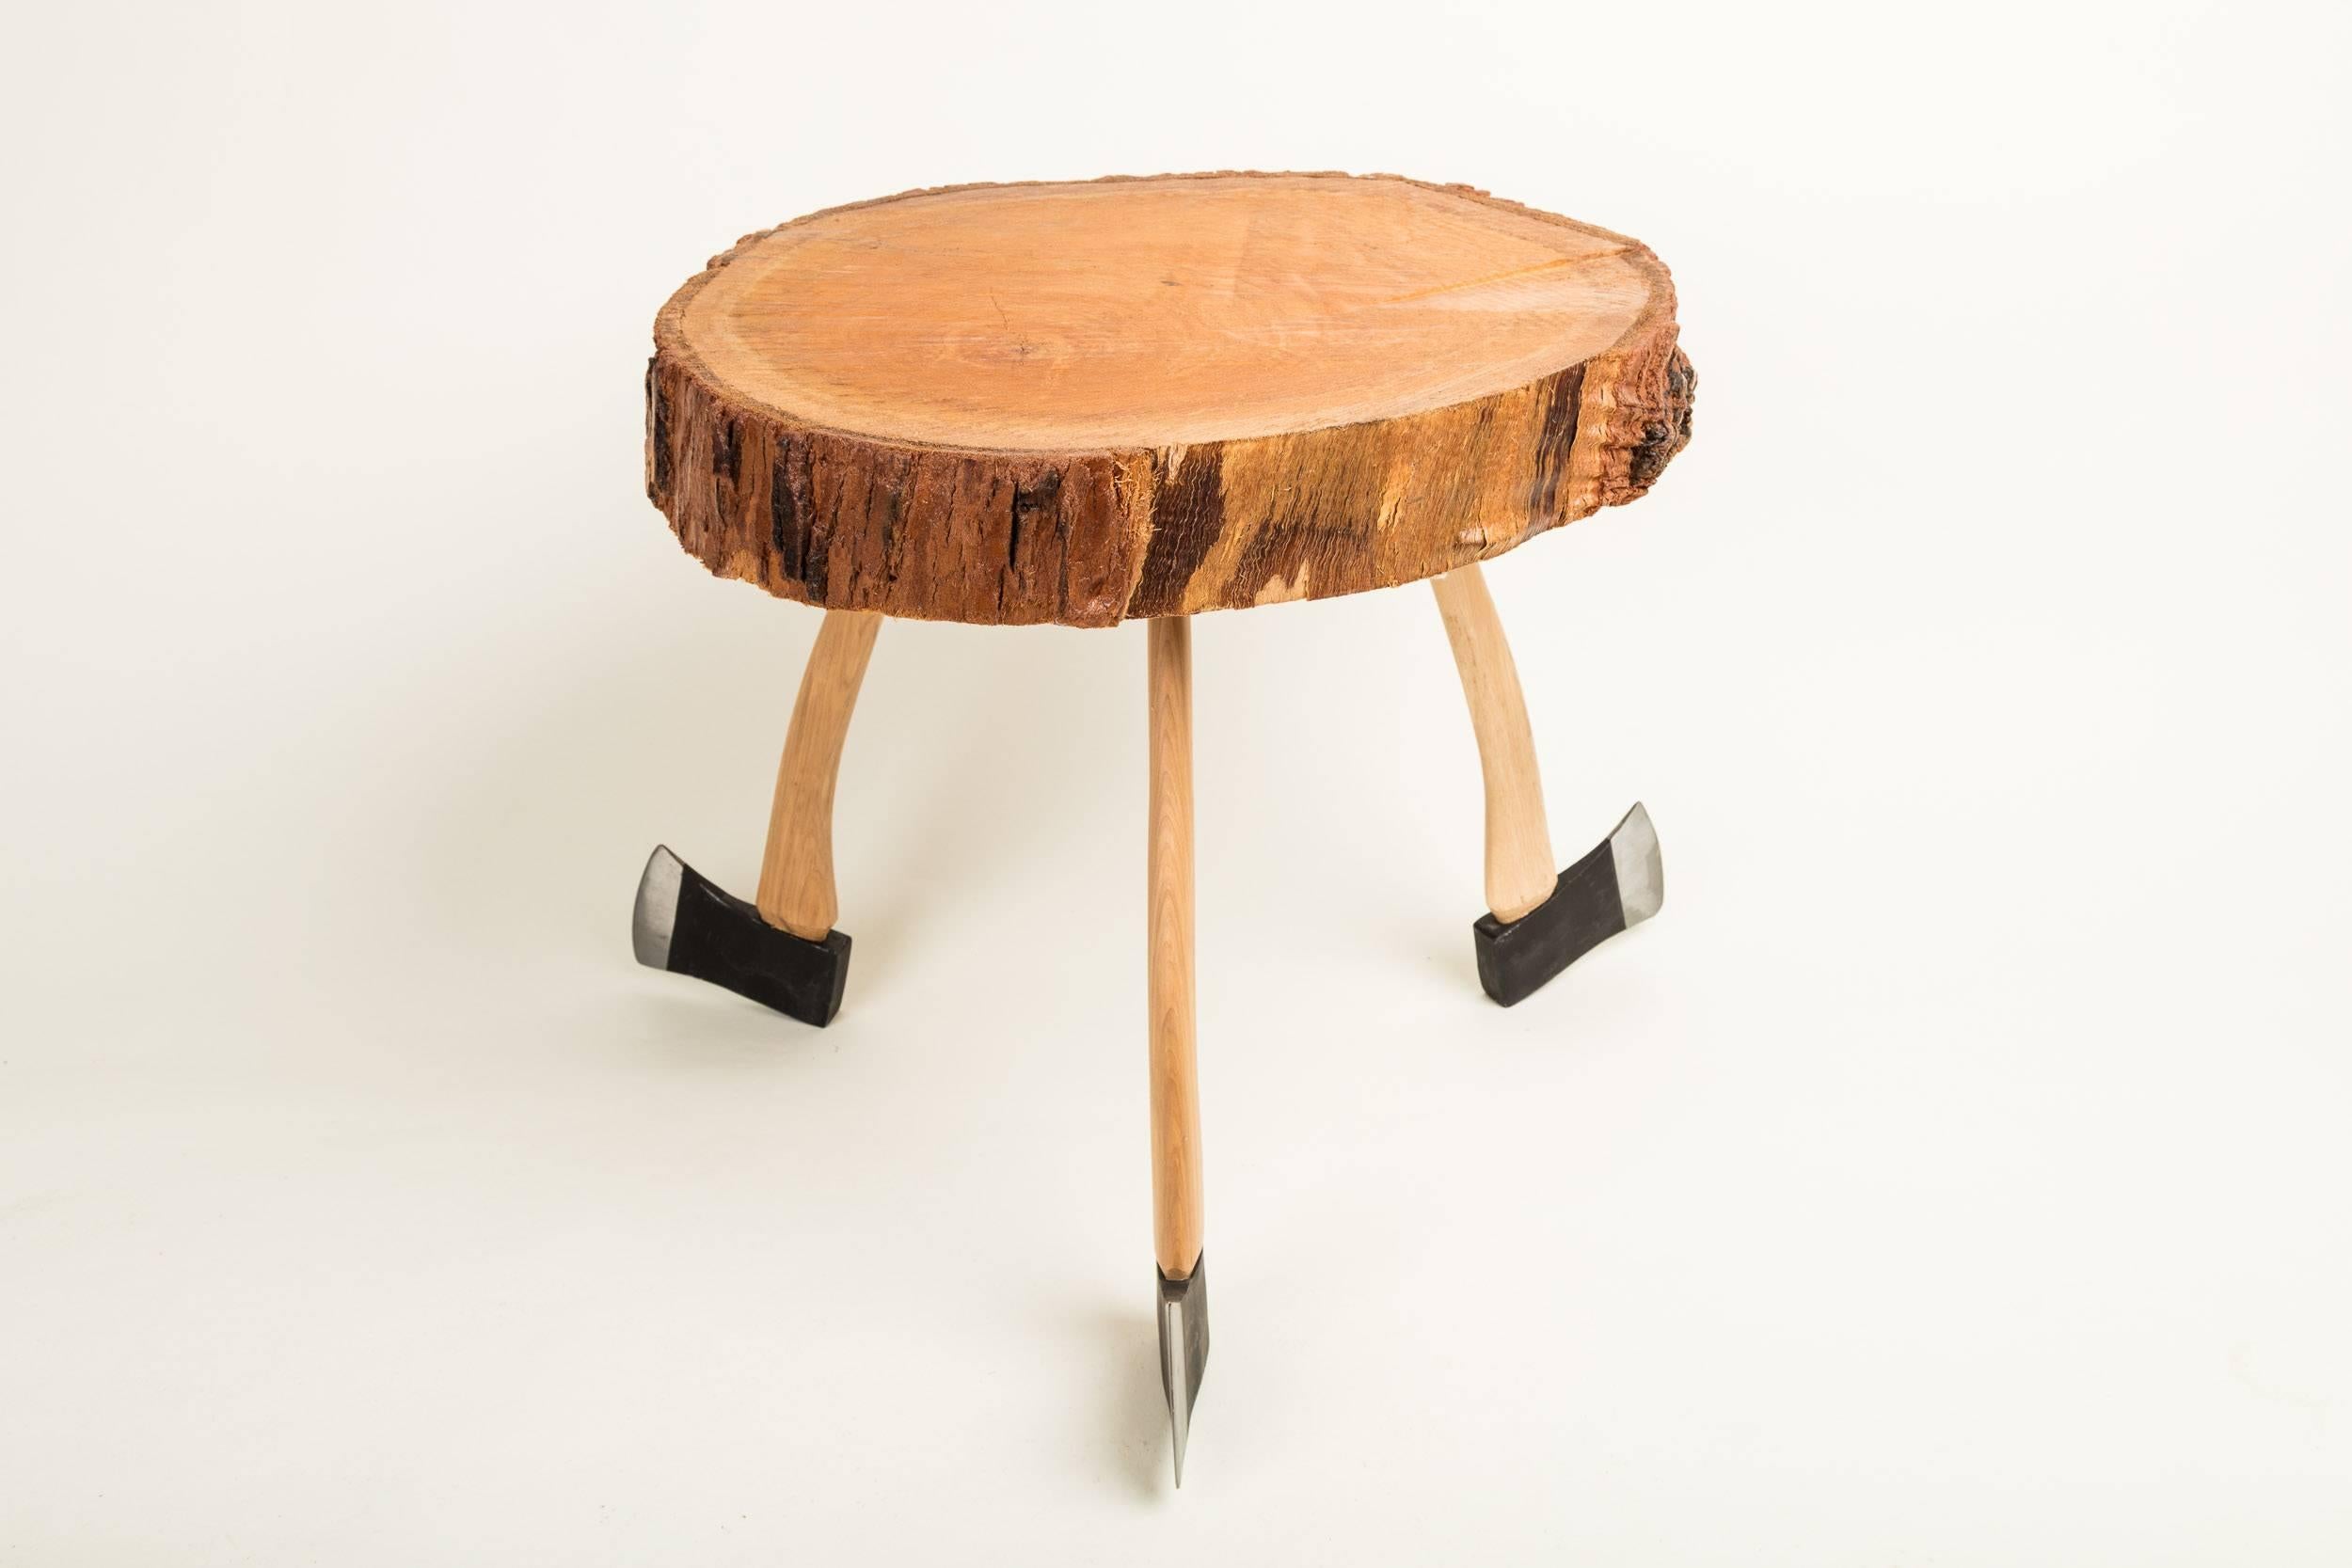 Made from a cross section of a felled pine tree, this unique item is elevated by its abstract base. Giving homage to lumberjack culture, this is more than a table, it's a true conversation piece. 

It's recommended to only use this table for